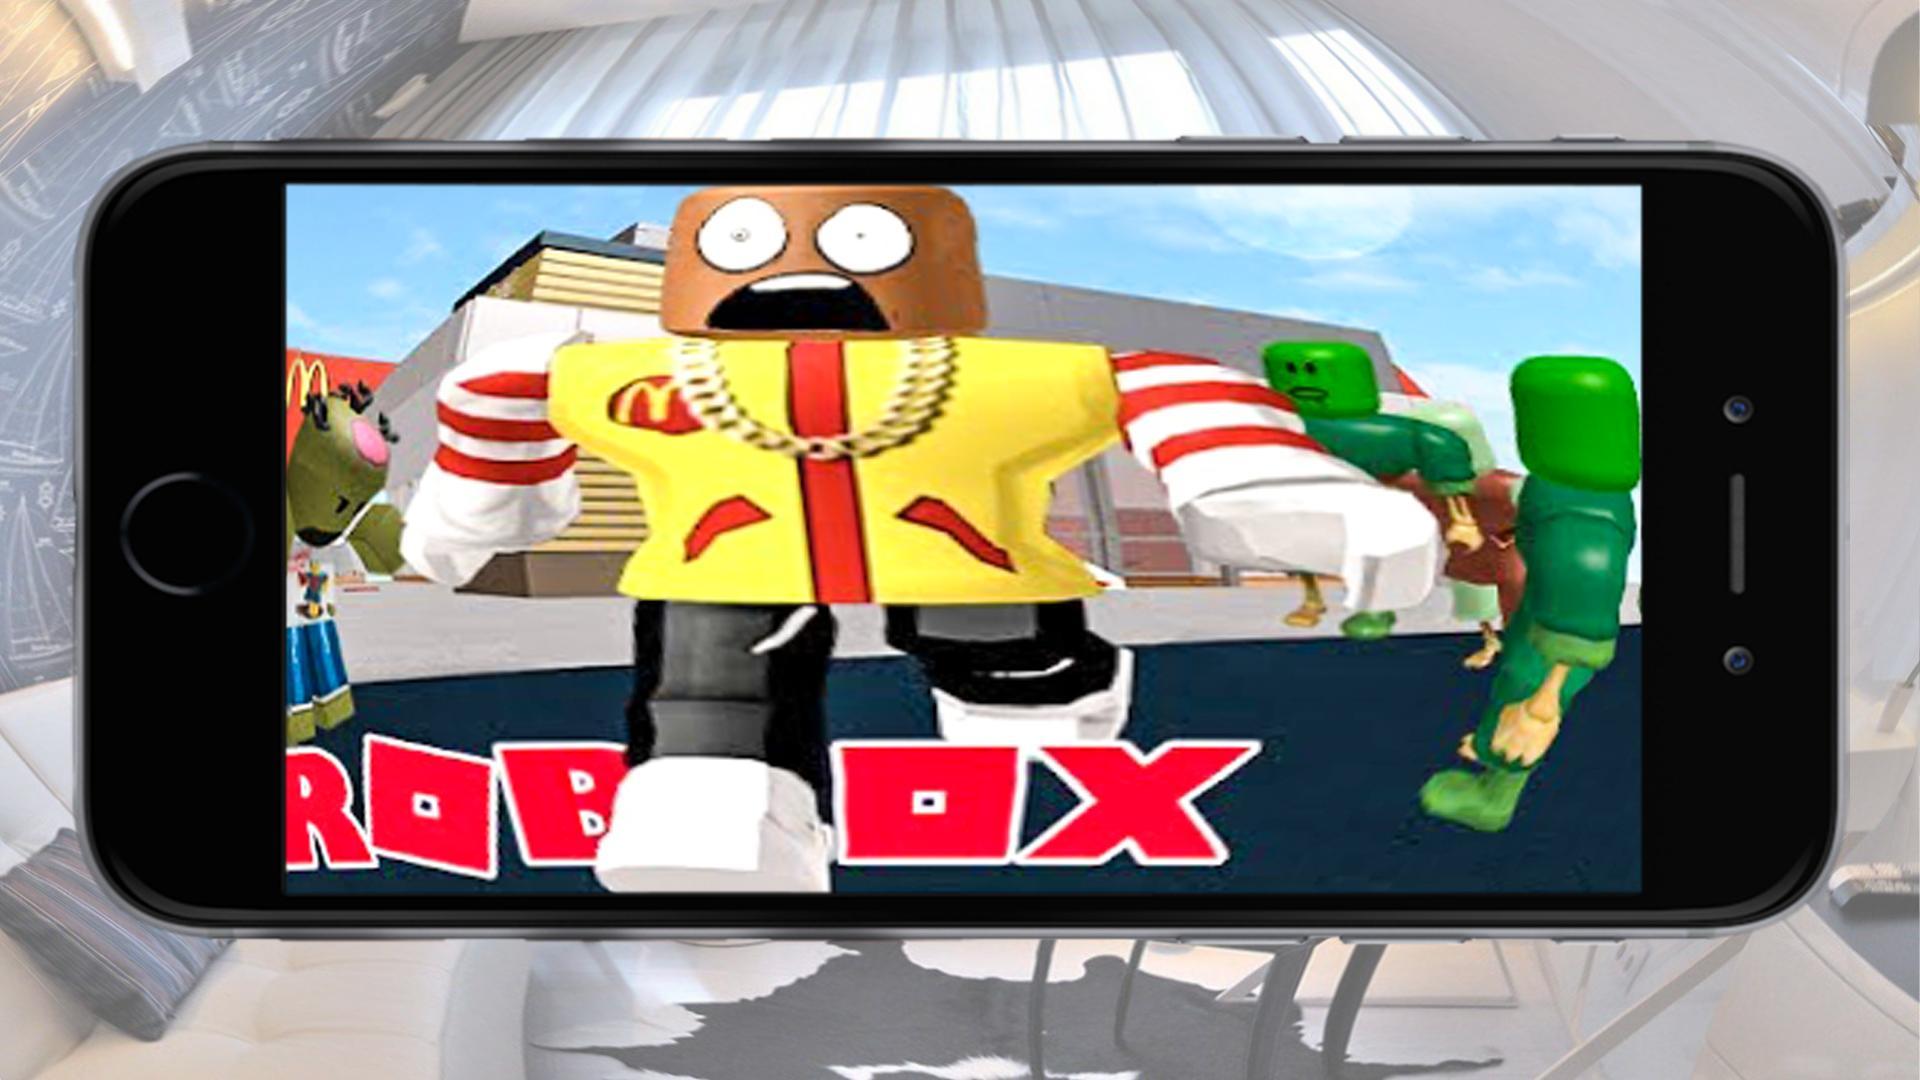 Guide Zombie Attack Roblox For Android Apk Download